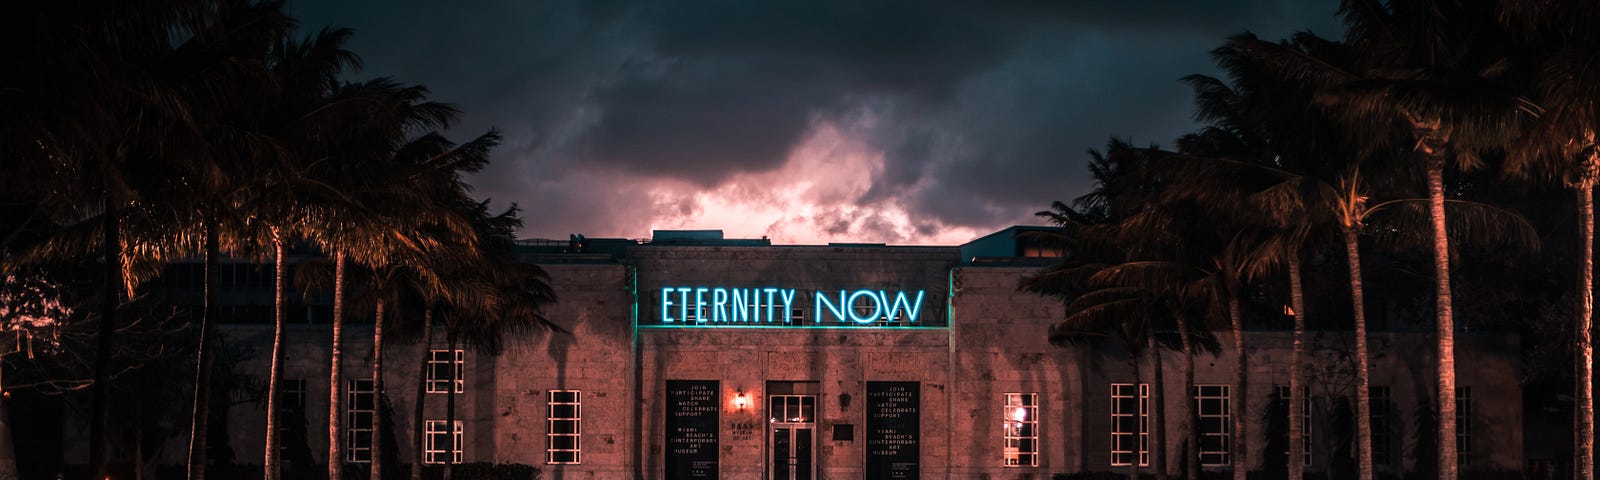 An “eternity now” sign.